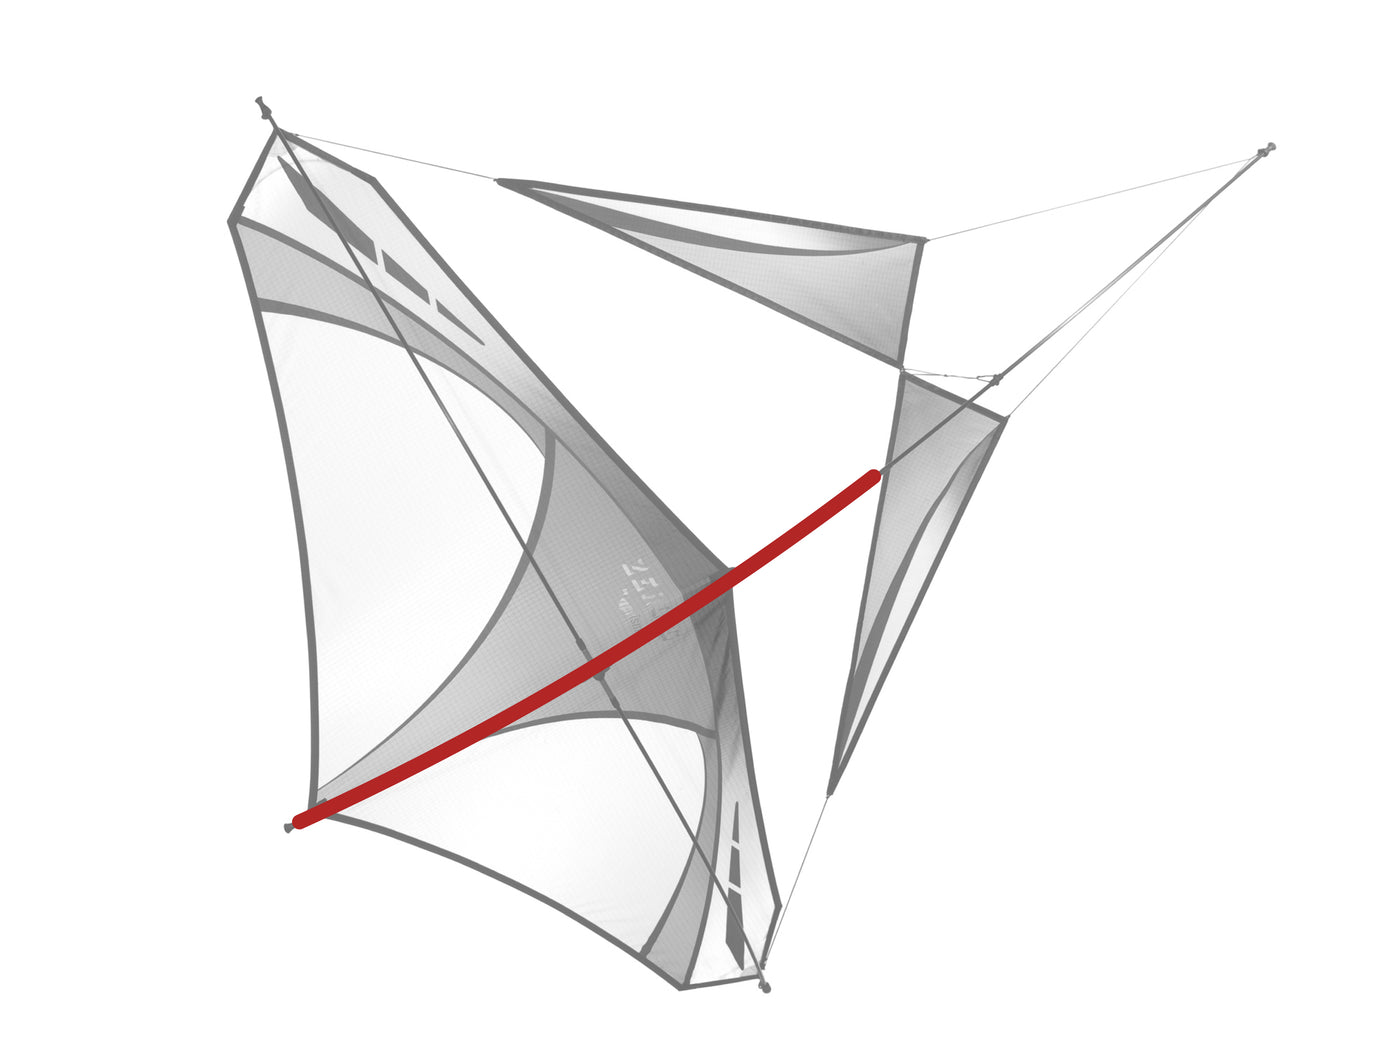 Diagram showing location of the Zero G Tail Spine on the kite.